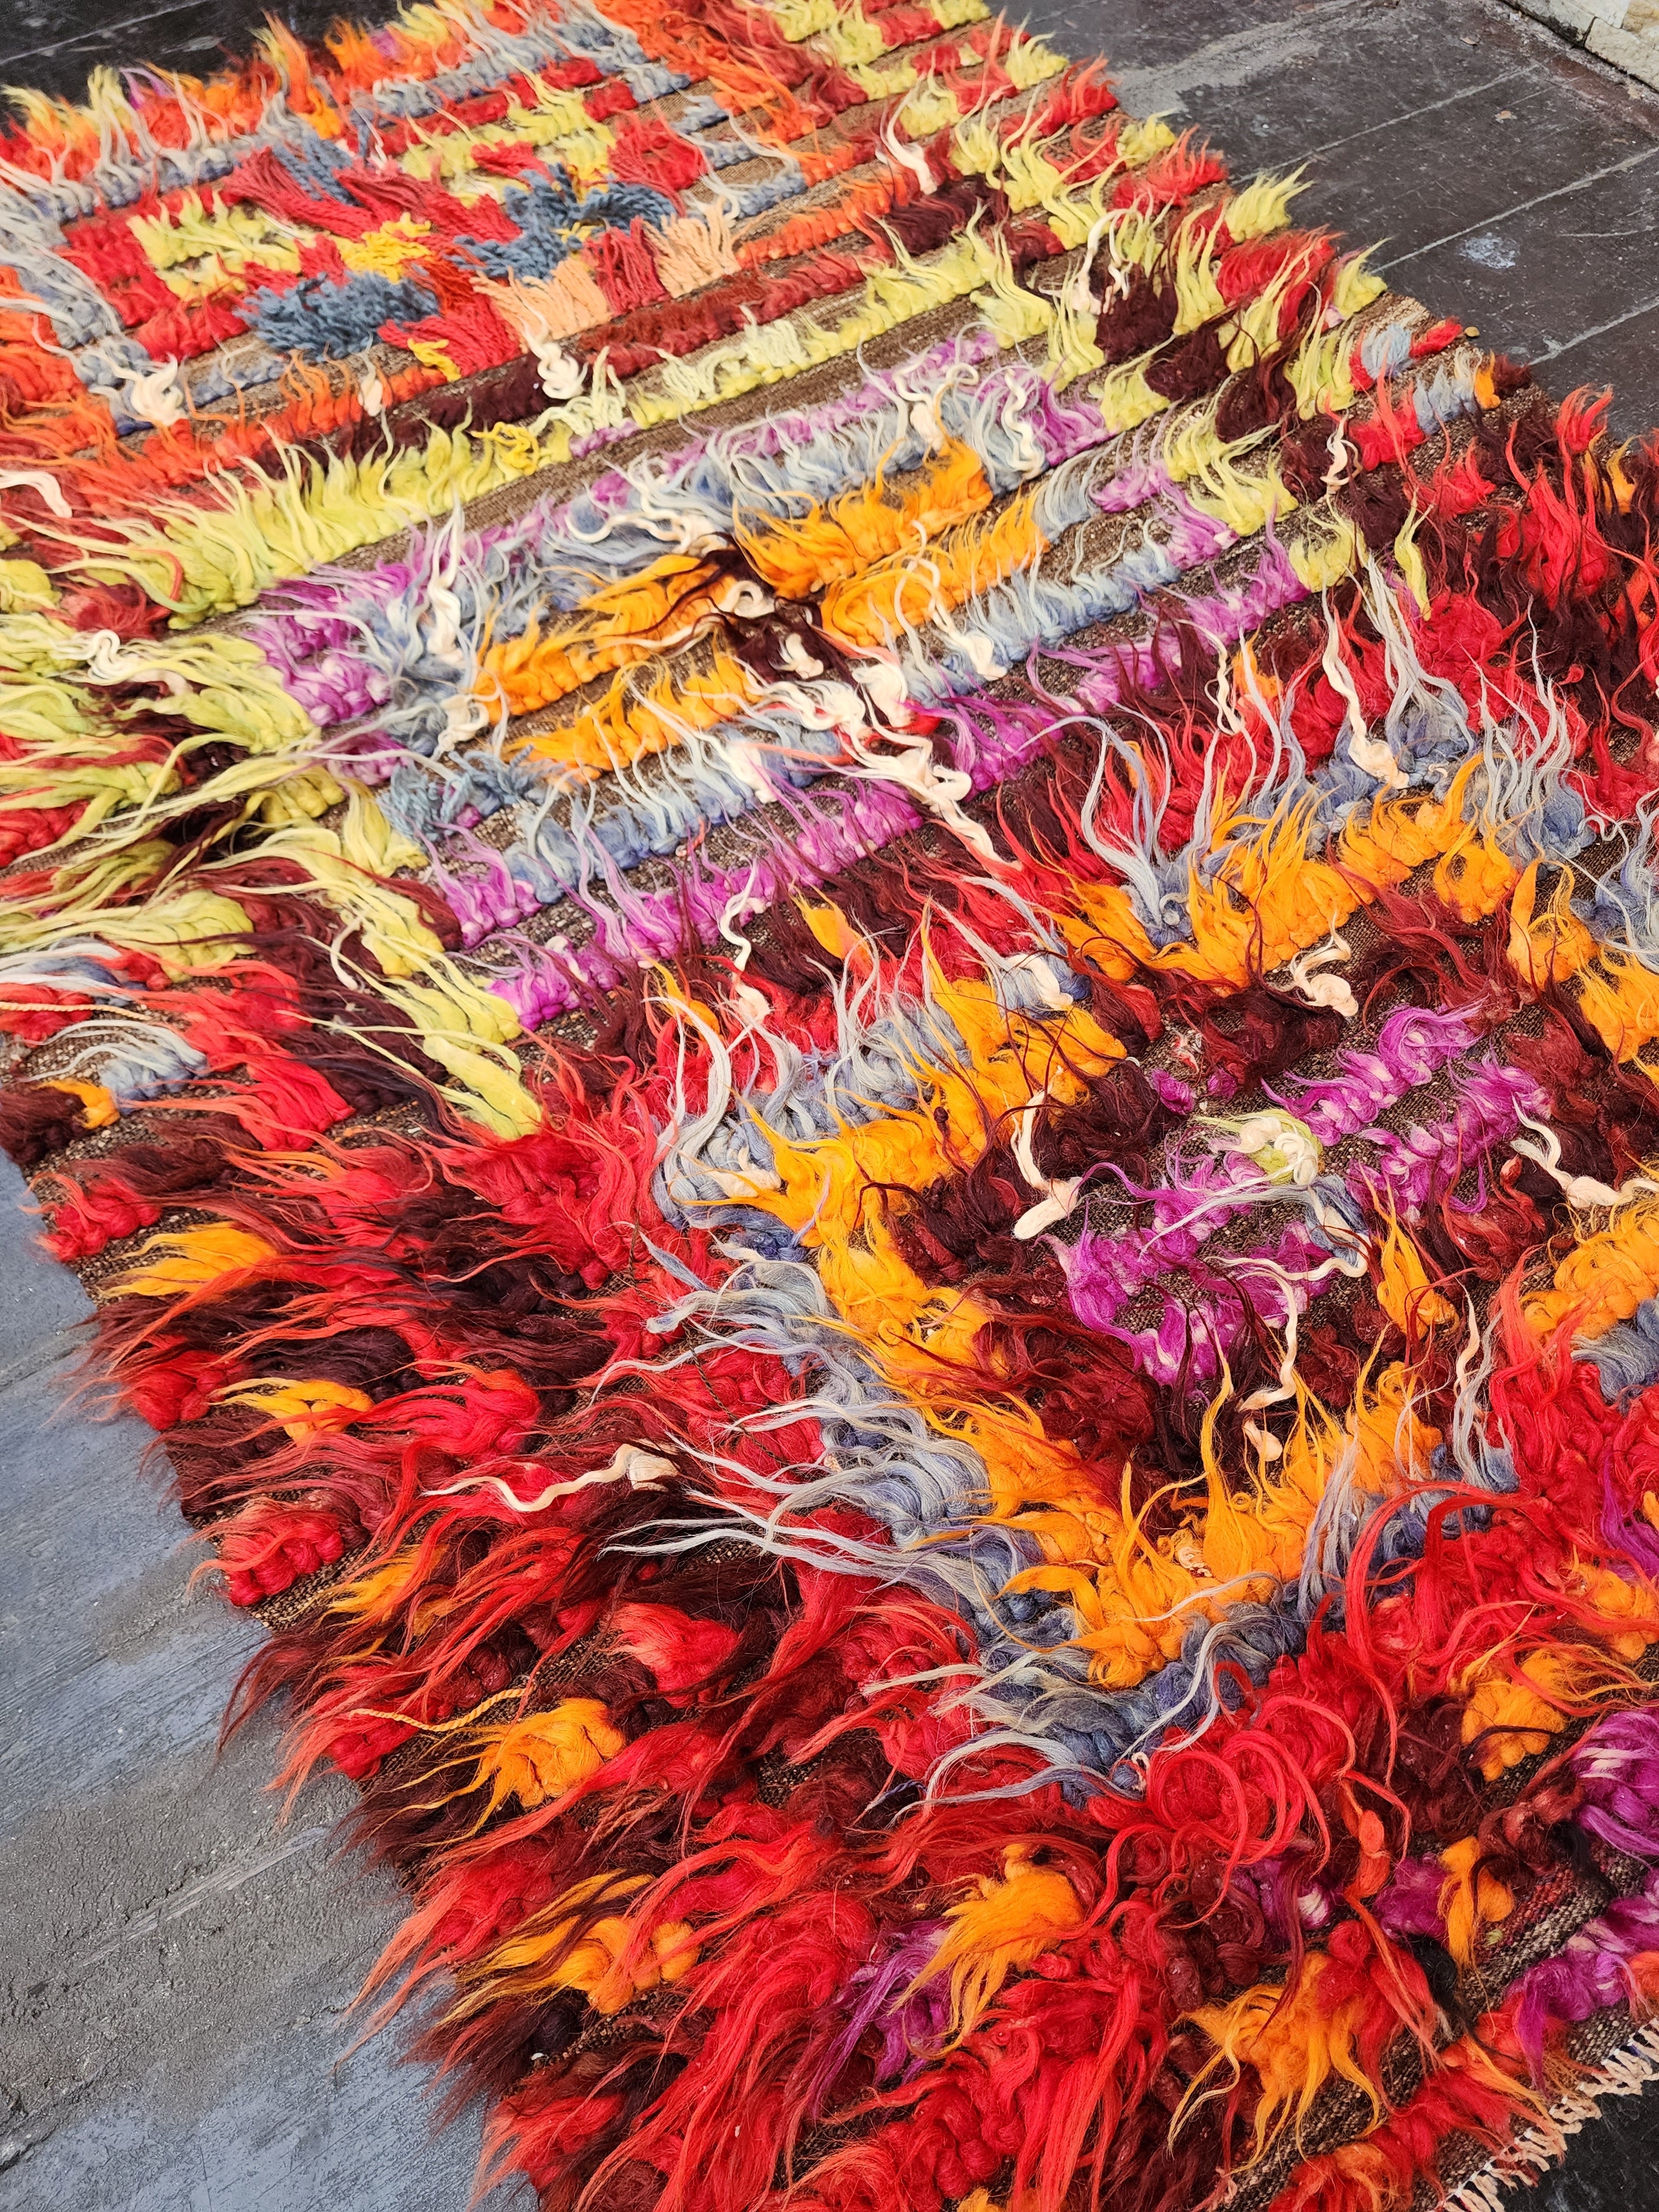 Turkish Filikli Tulu Rug, 5 ft 2 in x 3 ft 5 in, Red, Orange, Purple and Yellow Shaggy Pile Kilim Handmade from Natural Wool